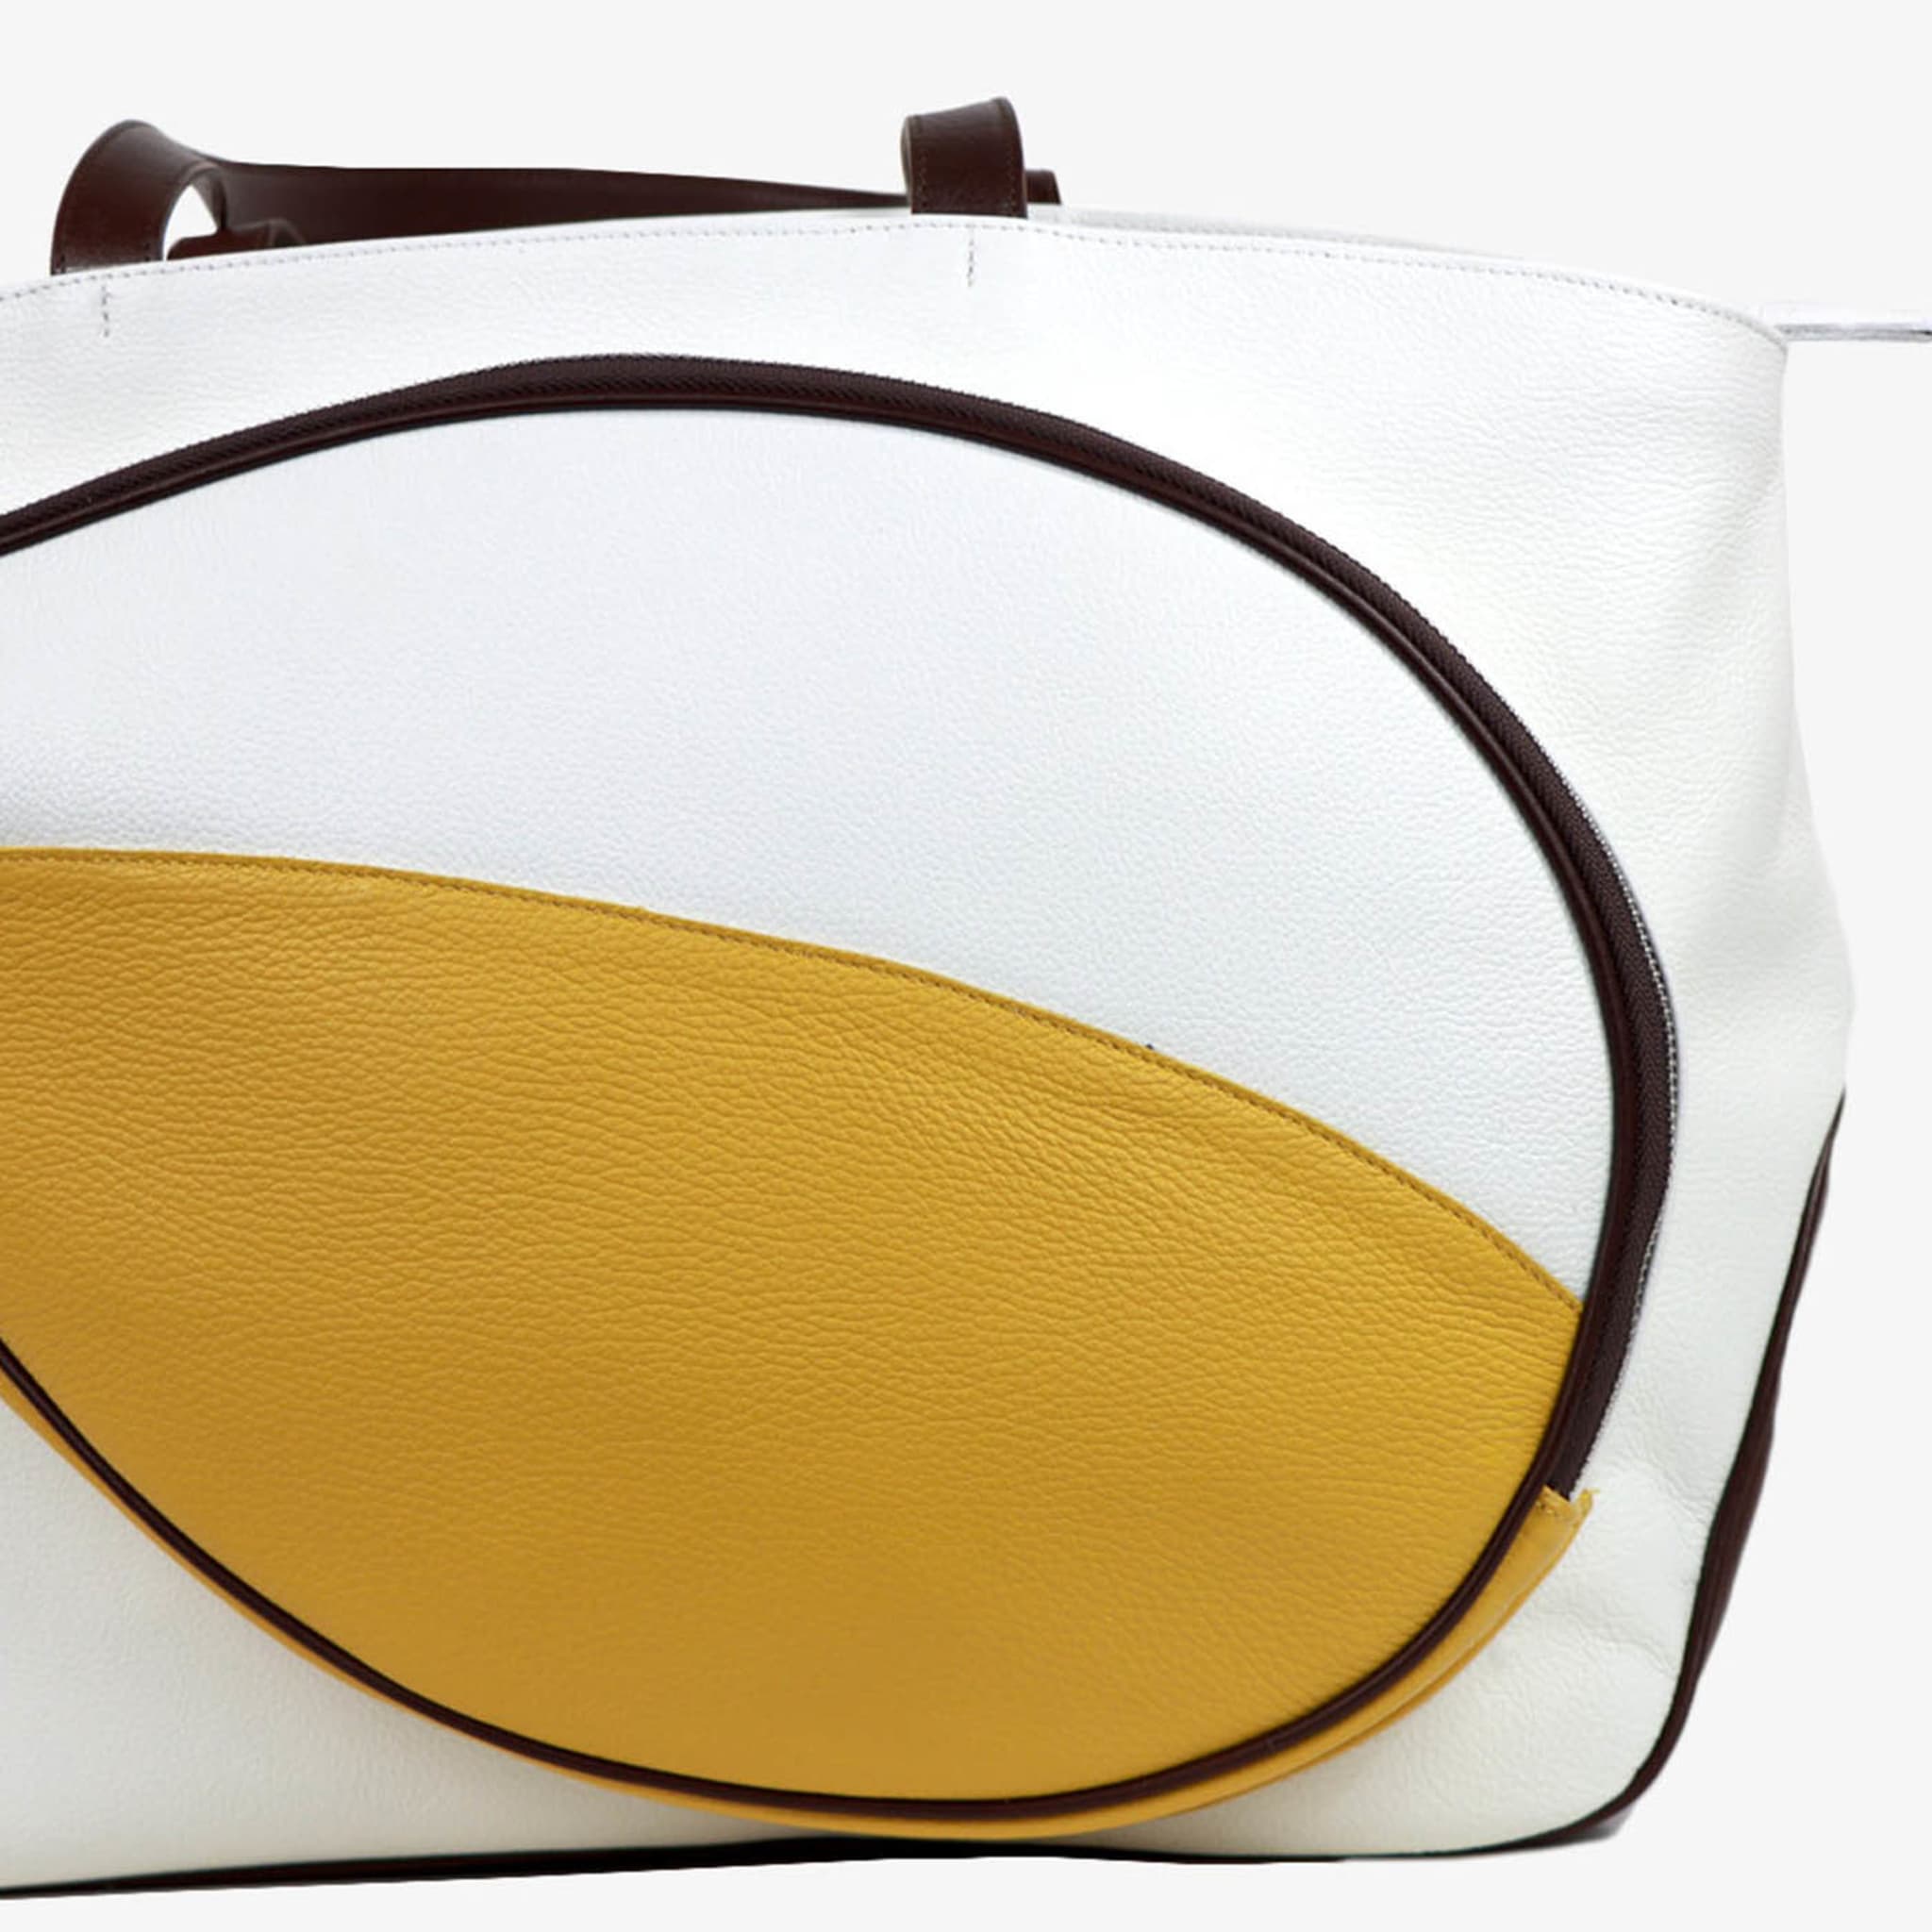 Sport White/Yellow/Brown Bag with Tennis-Racket-Shaped Pocket - Alternative view 3